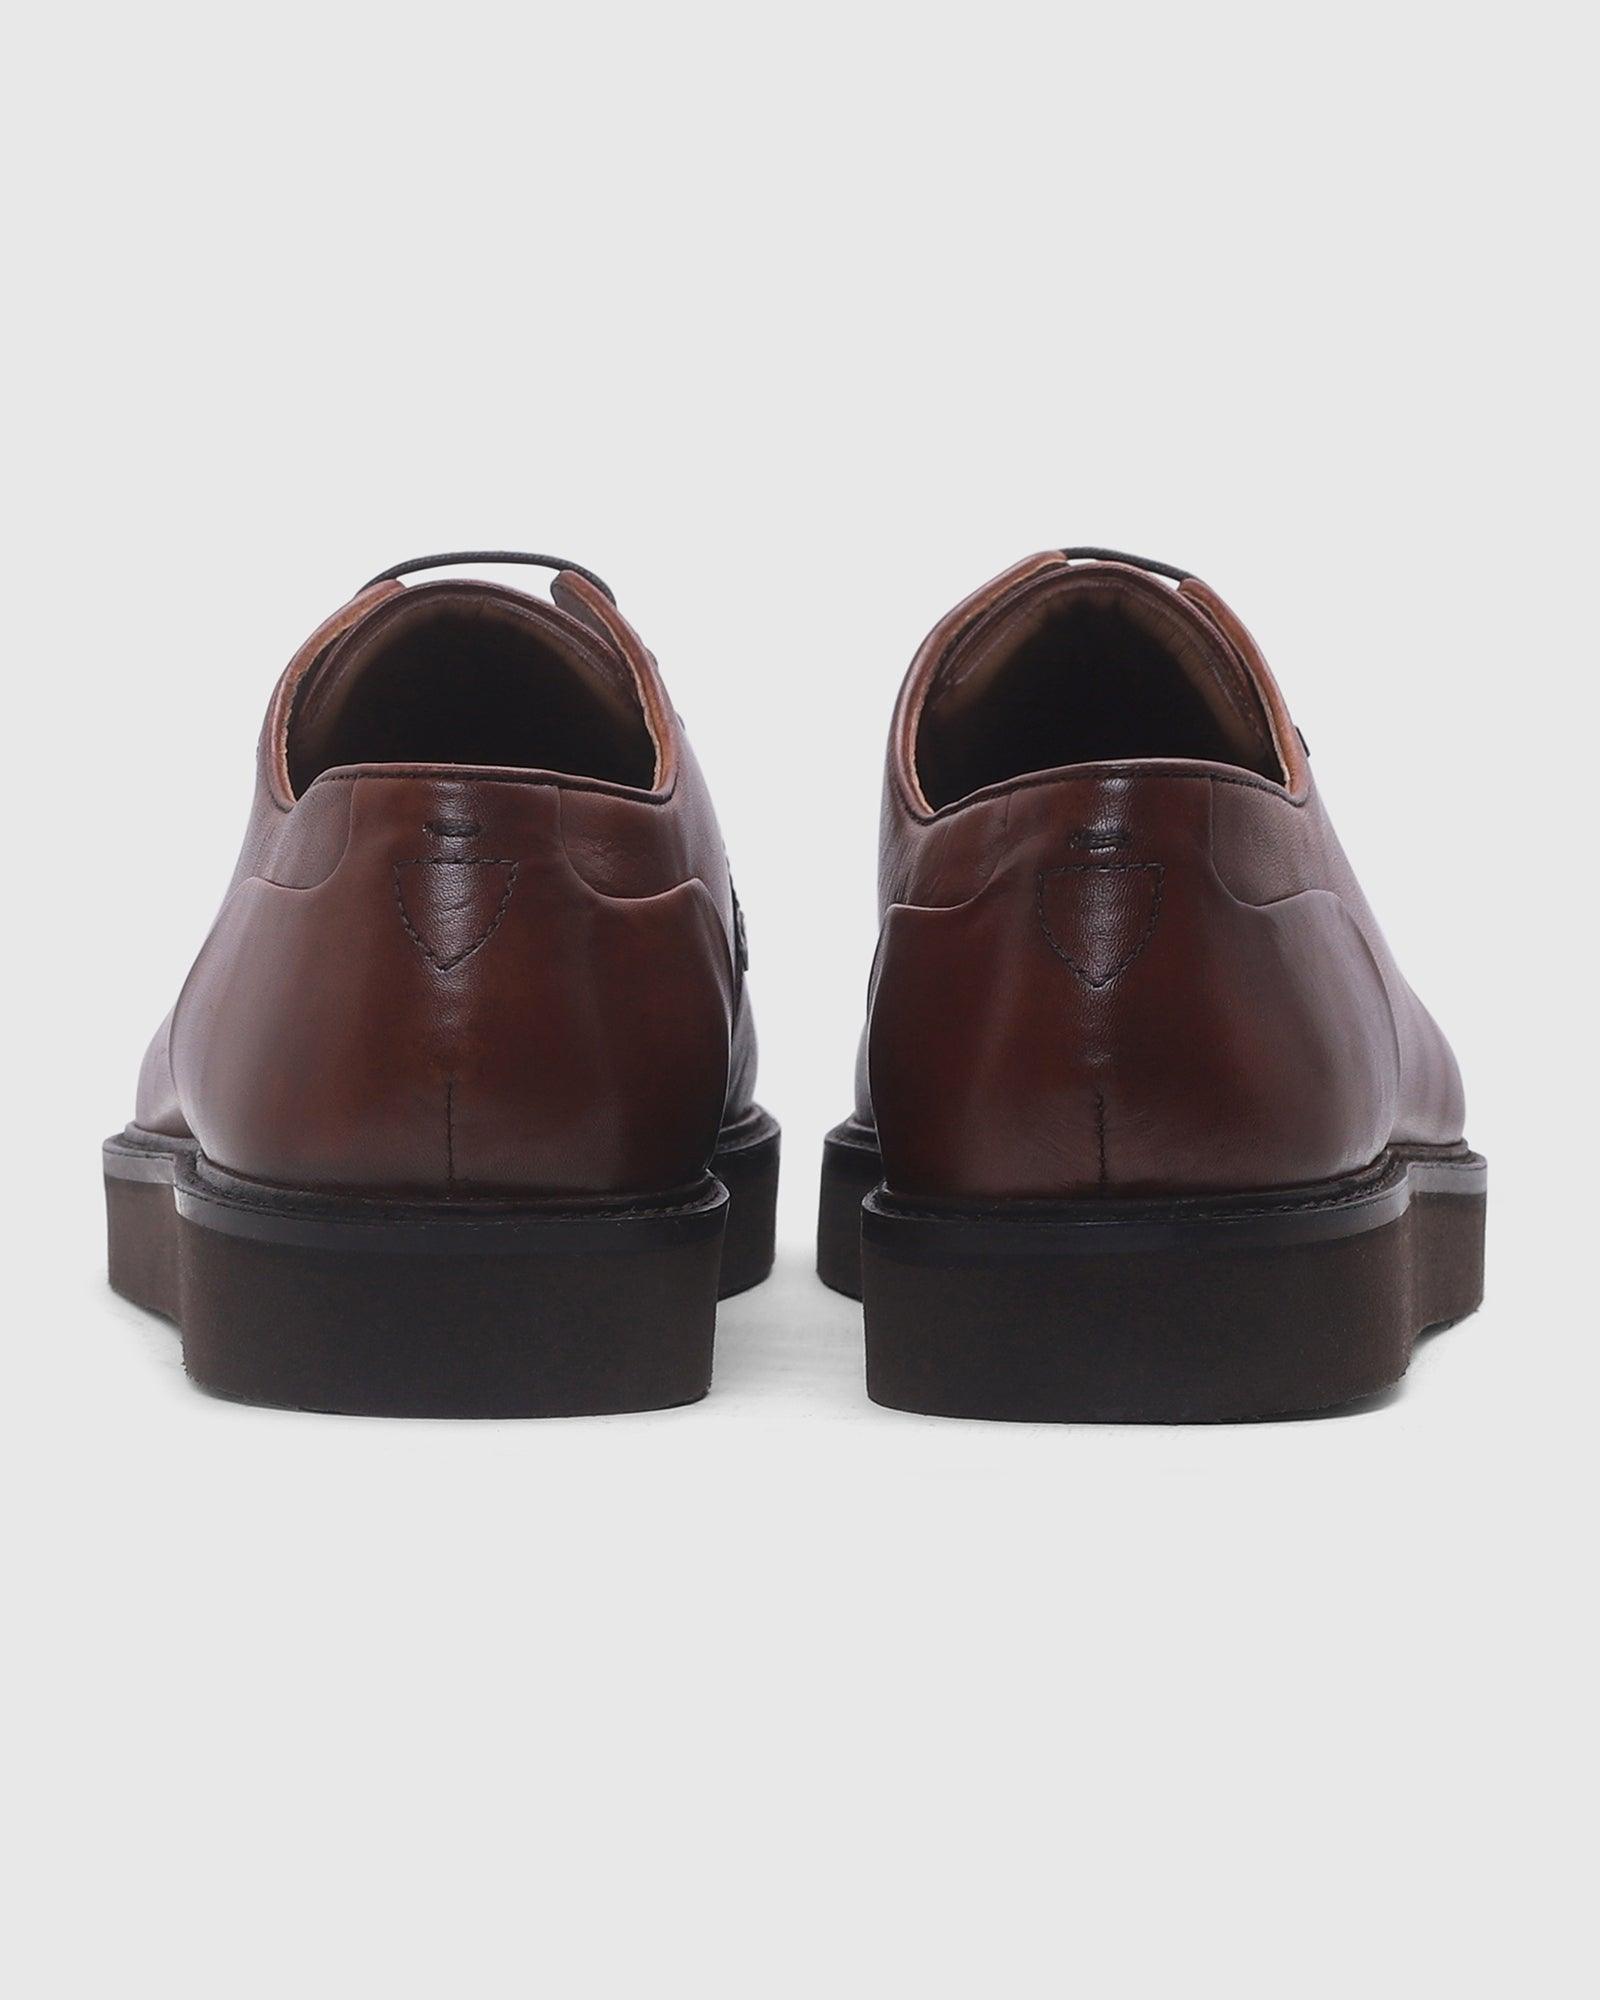 Leather Formal Brown Solid Derby Shoes - Prex